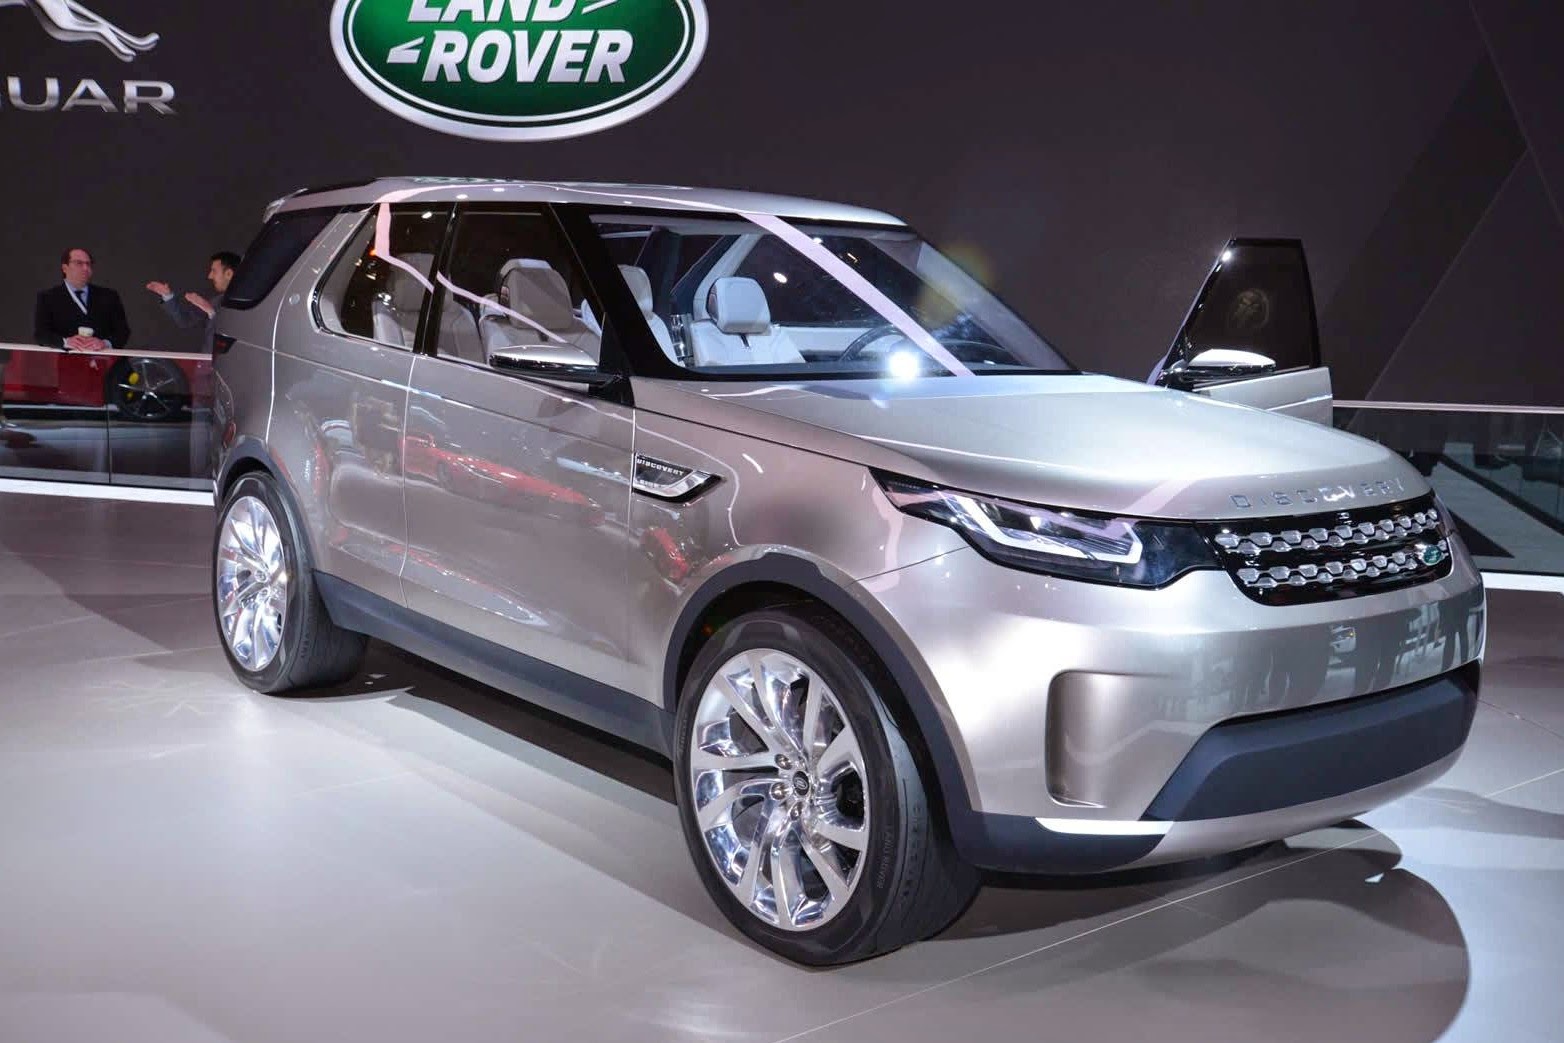 Discovery Vision Concept